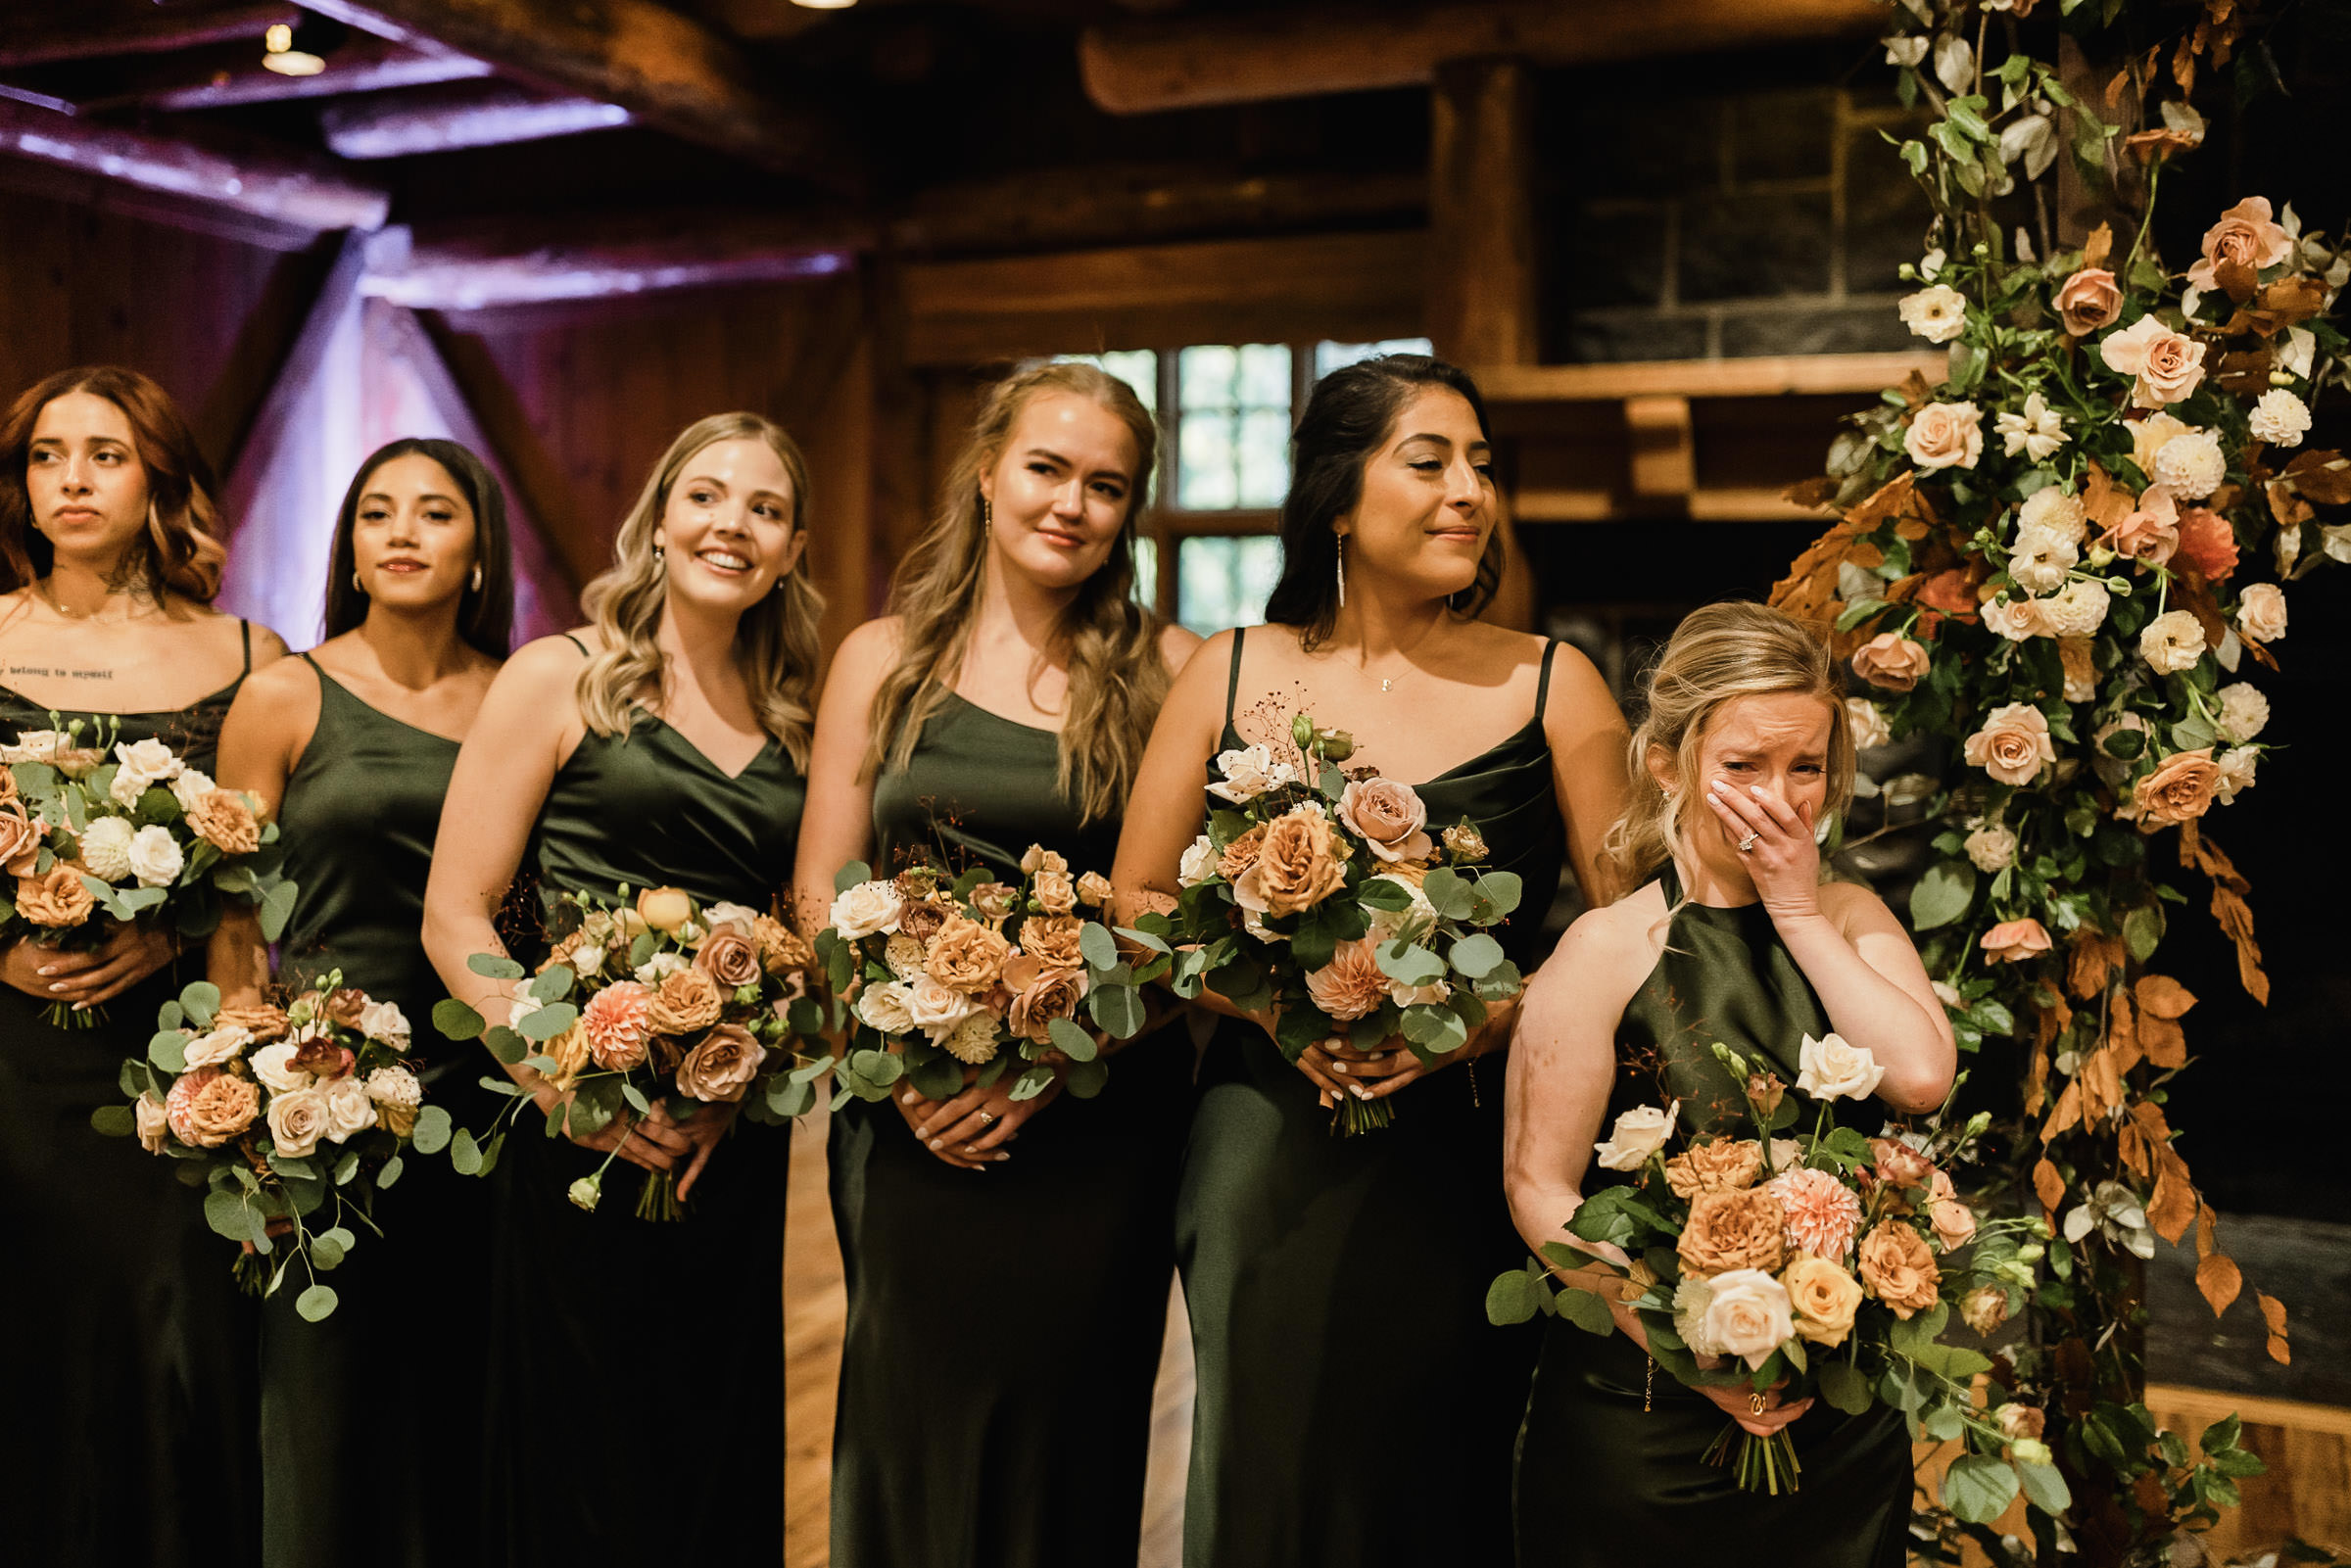 Bride's sister and maid of honor reacts emotionally as bride walks down the aisle